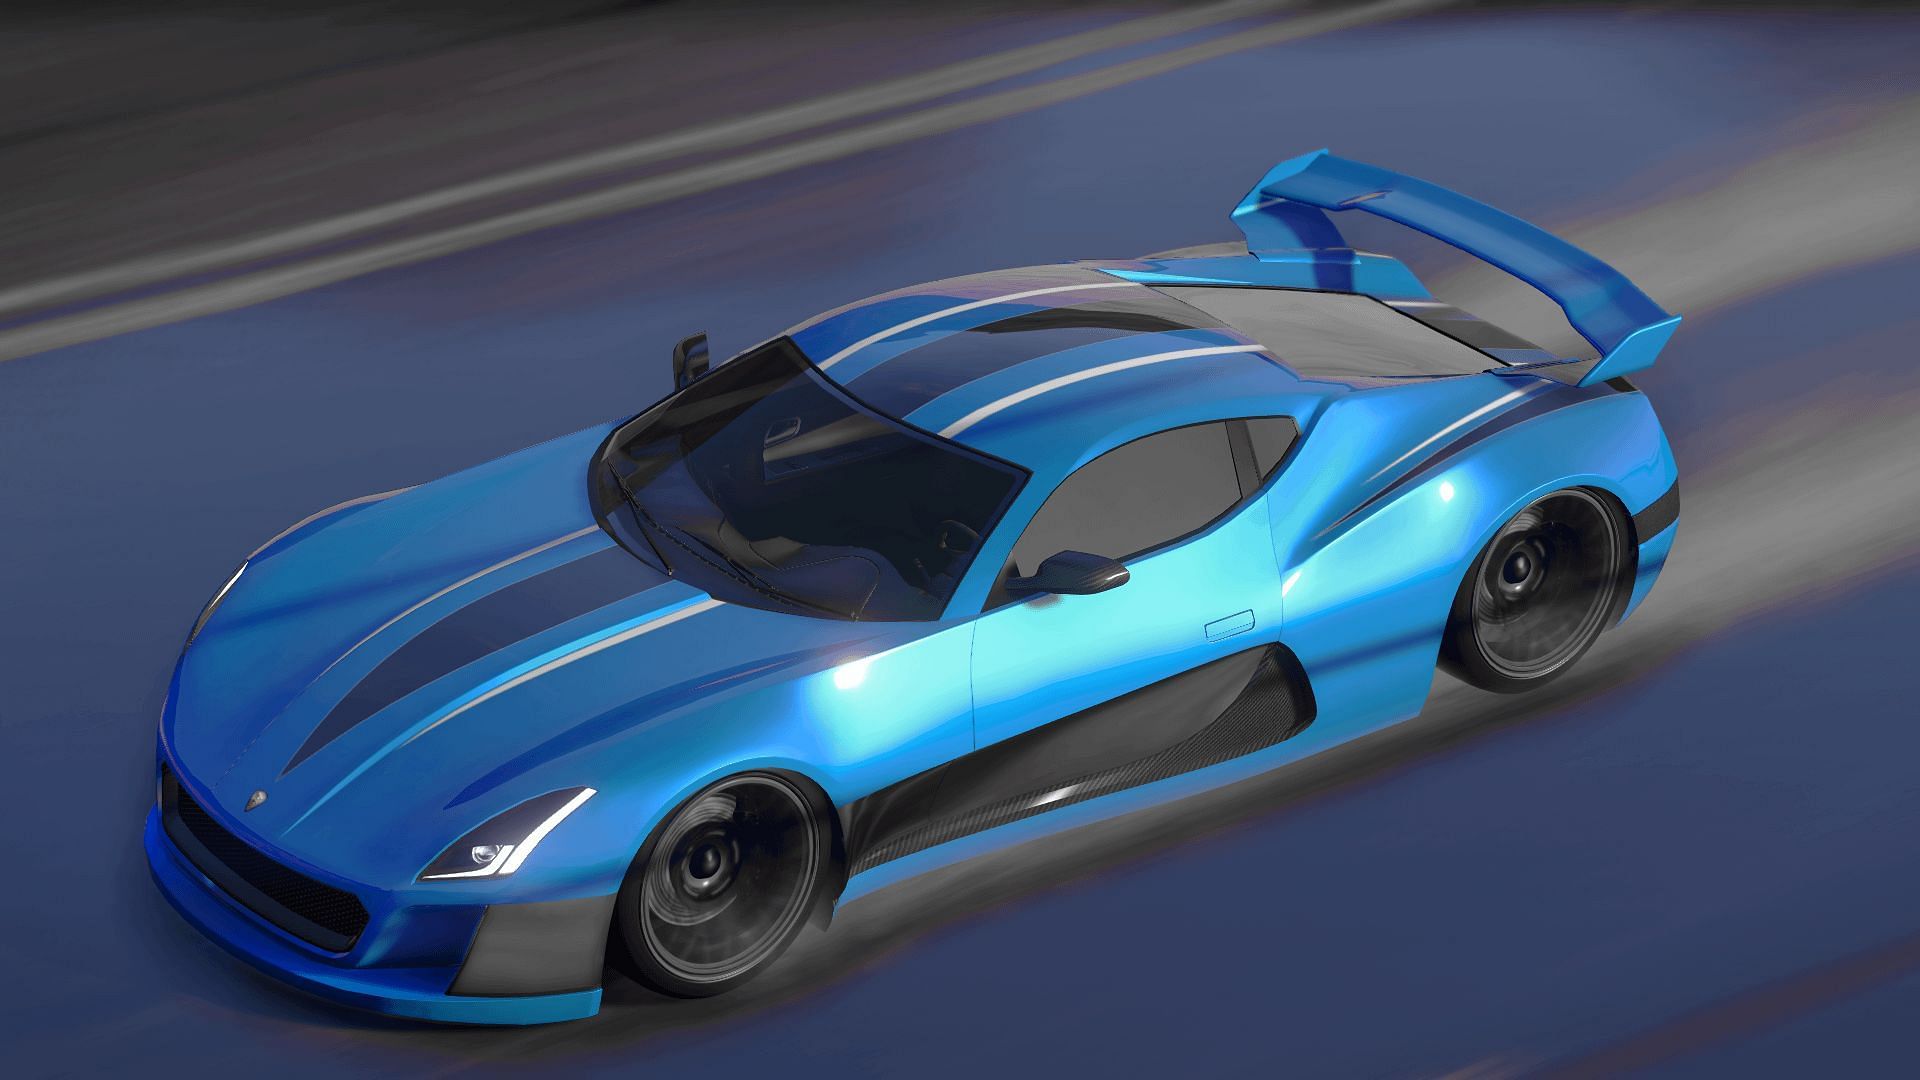 The Coil Cyclone is back in GTA Online for a limited time (Image via Reddit: u/Kylo_18)